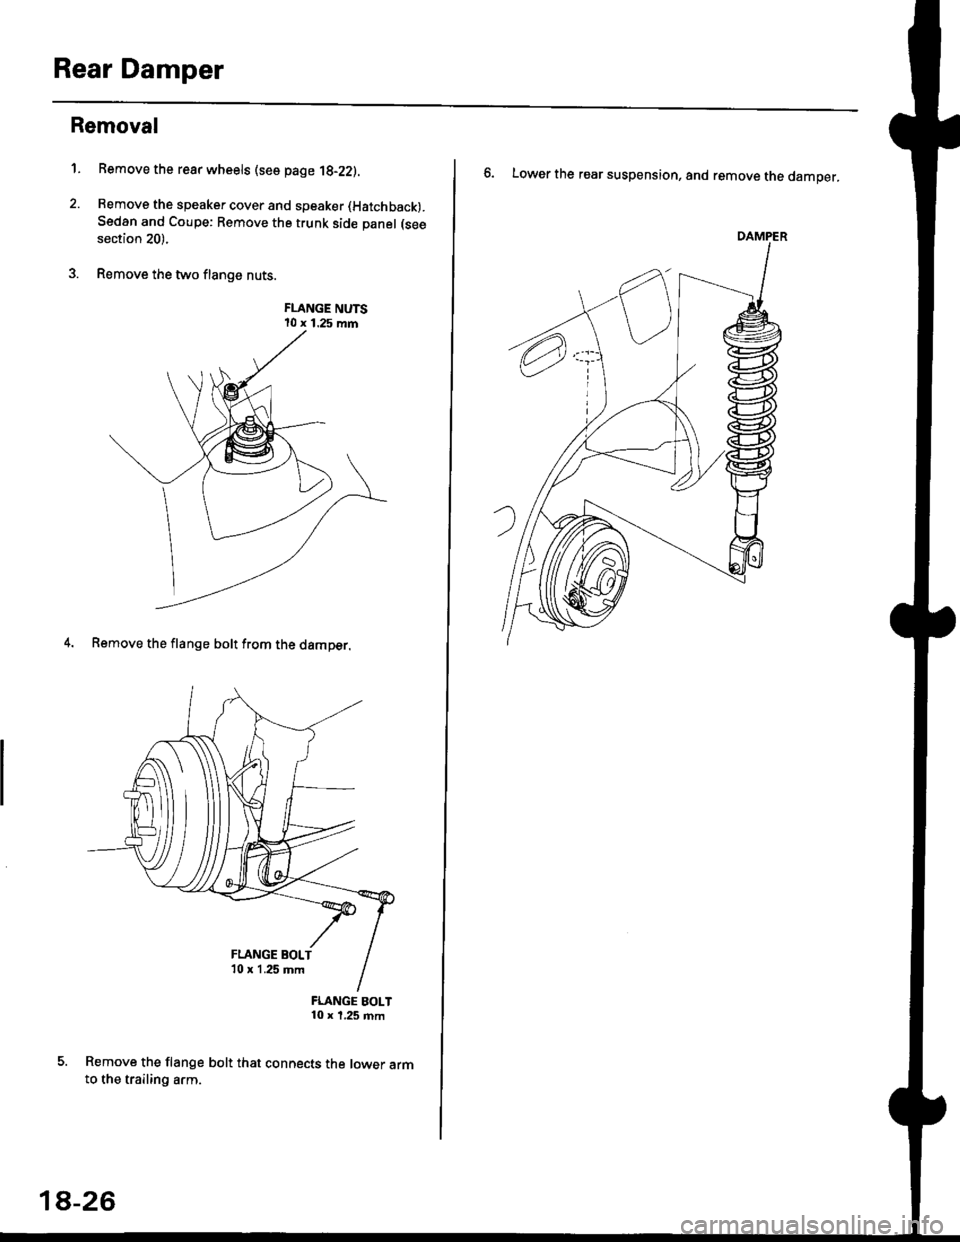 HONDA CIVIC 1998 6.G Workshop Manual Rear Damper
Removal
1. Bemove the rear wheels (see page 1g-22).
2. Remove the speaker cover and speaker (Hatchback).
Sedan and Coupe: Remove the trunk side panel (see
section 20).
3. Remove the two fl